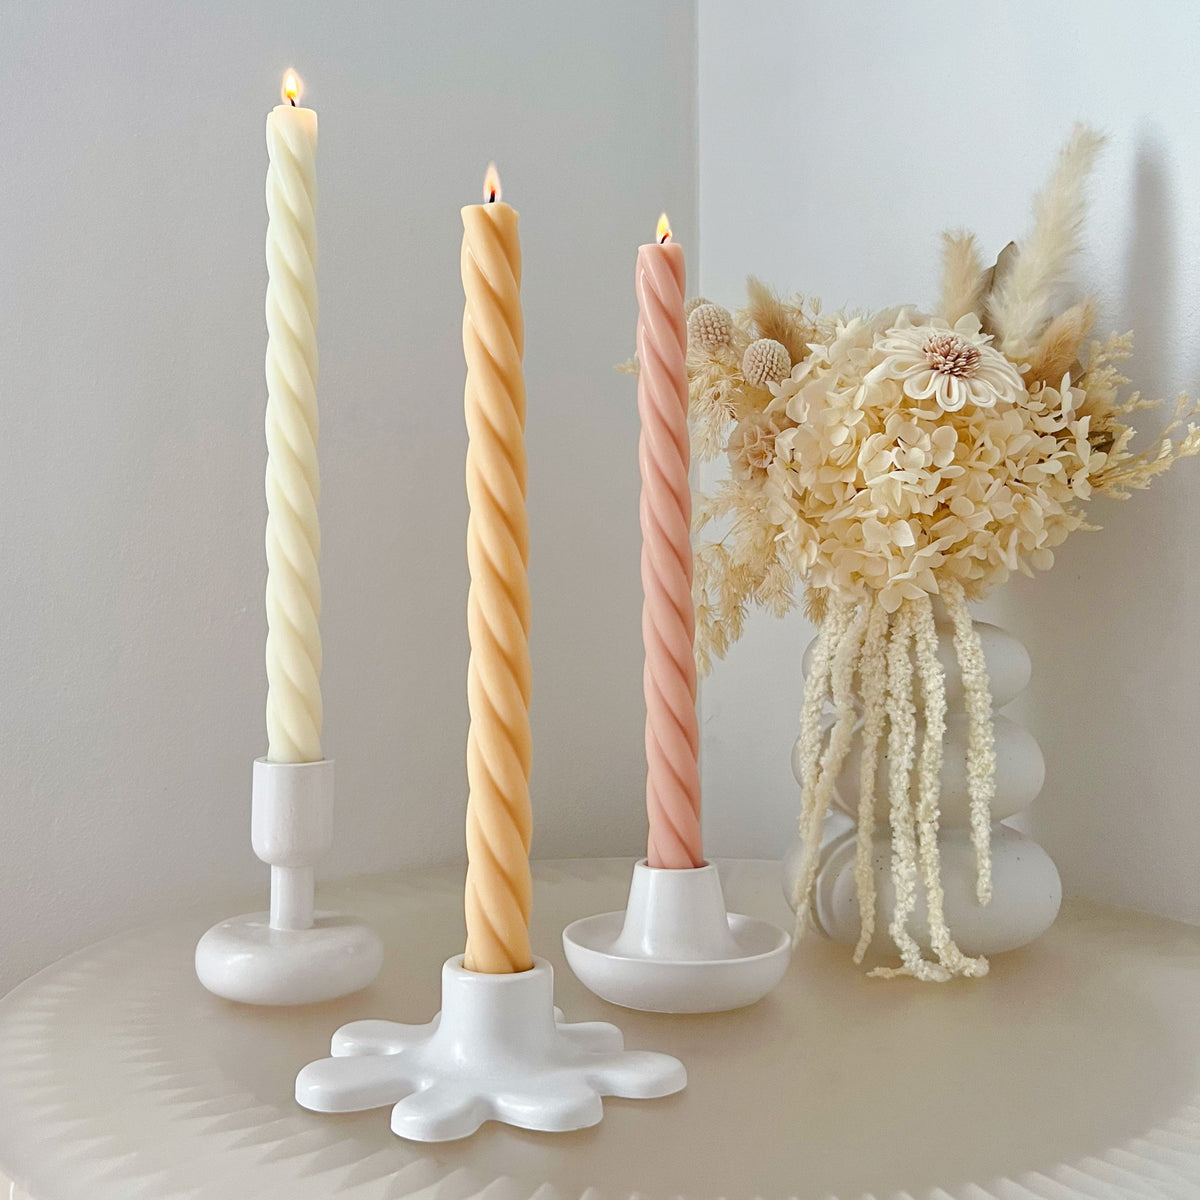 Handmade Taper Candle Holder, Table Décor, Dinner Candle Holder, Wedding Taper Candles, Handmade Homeware | LMJ Candles